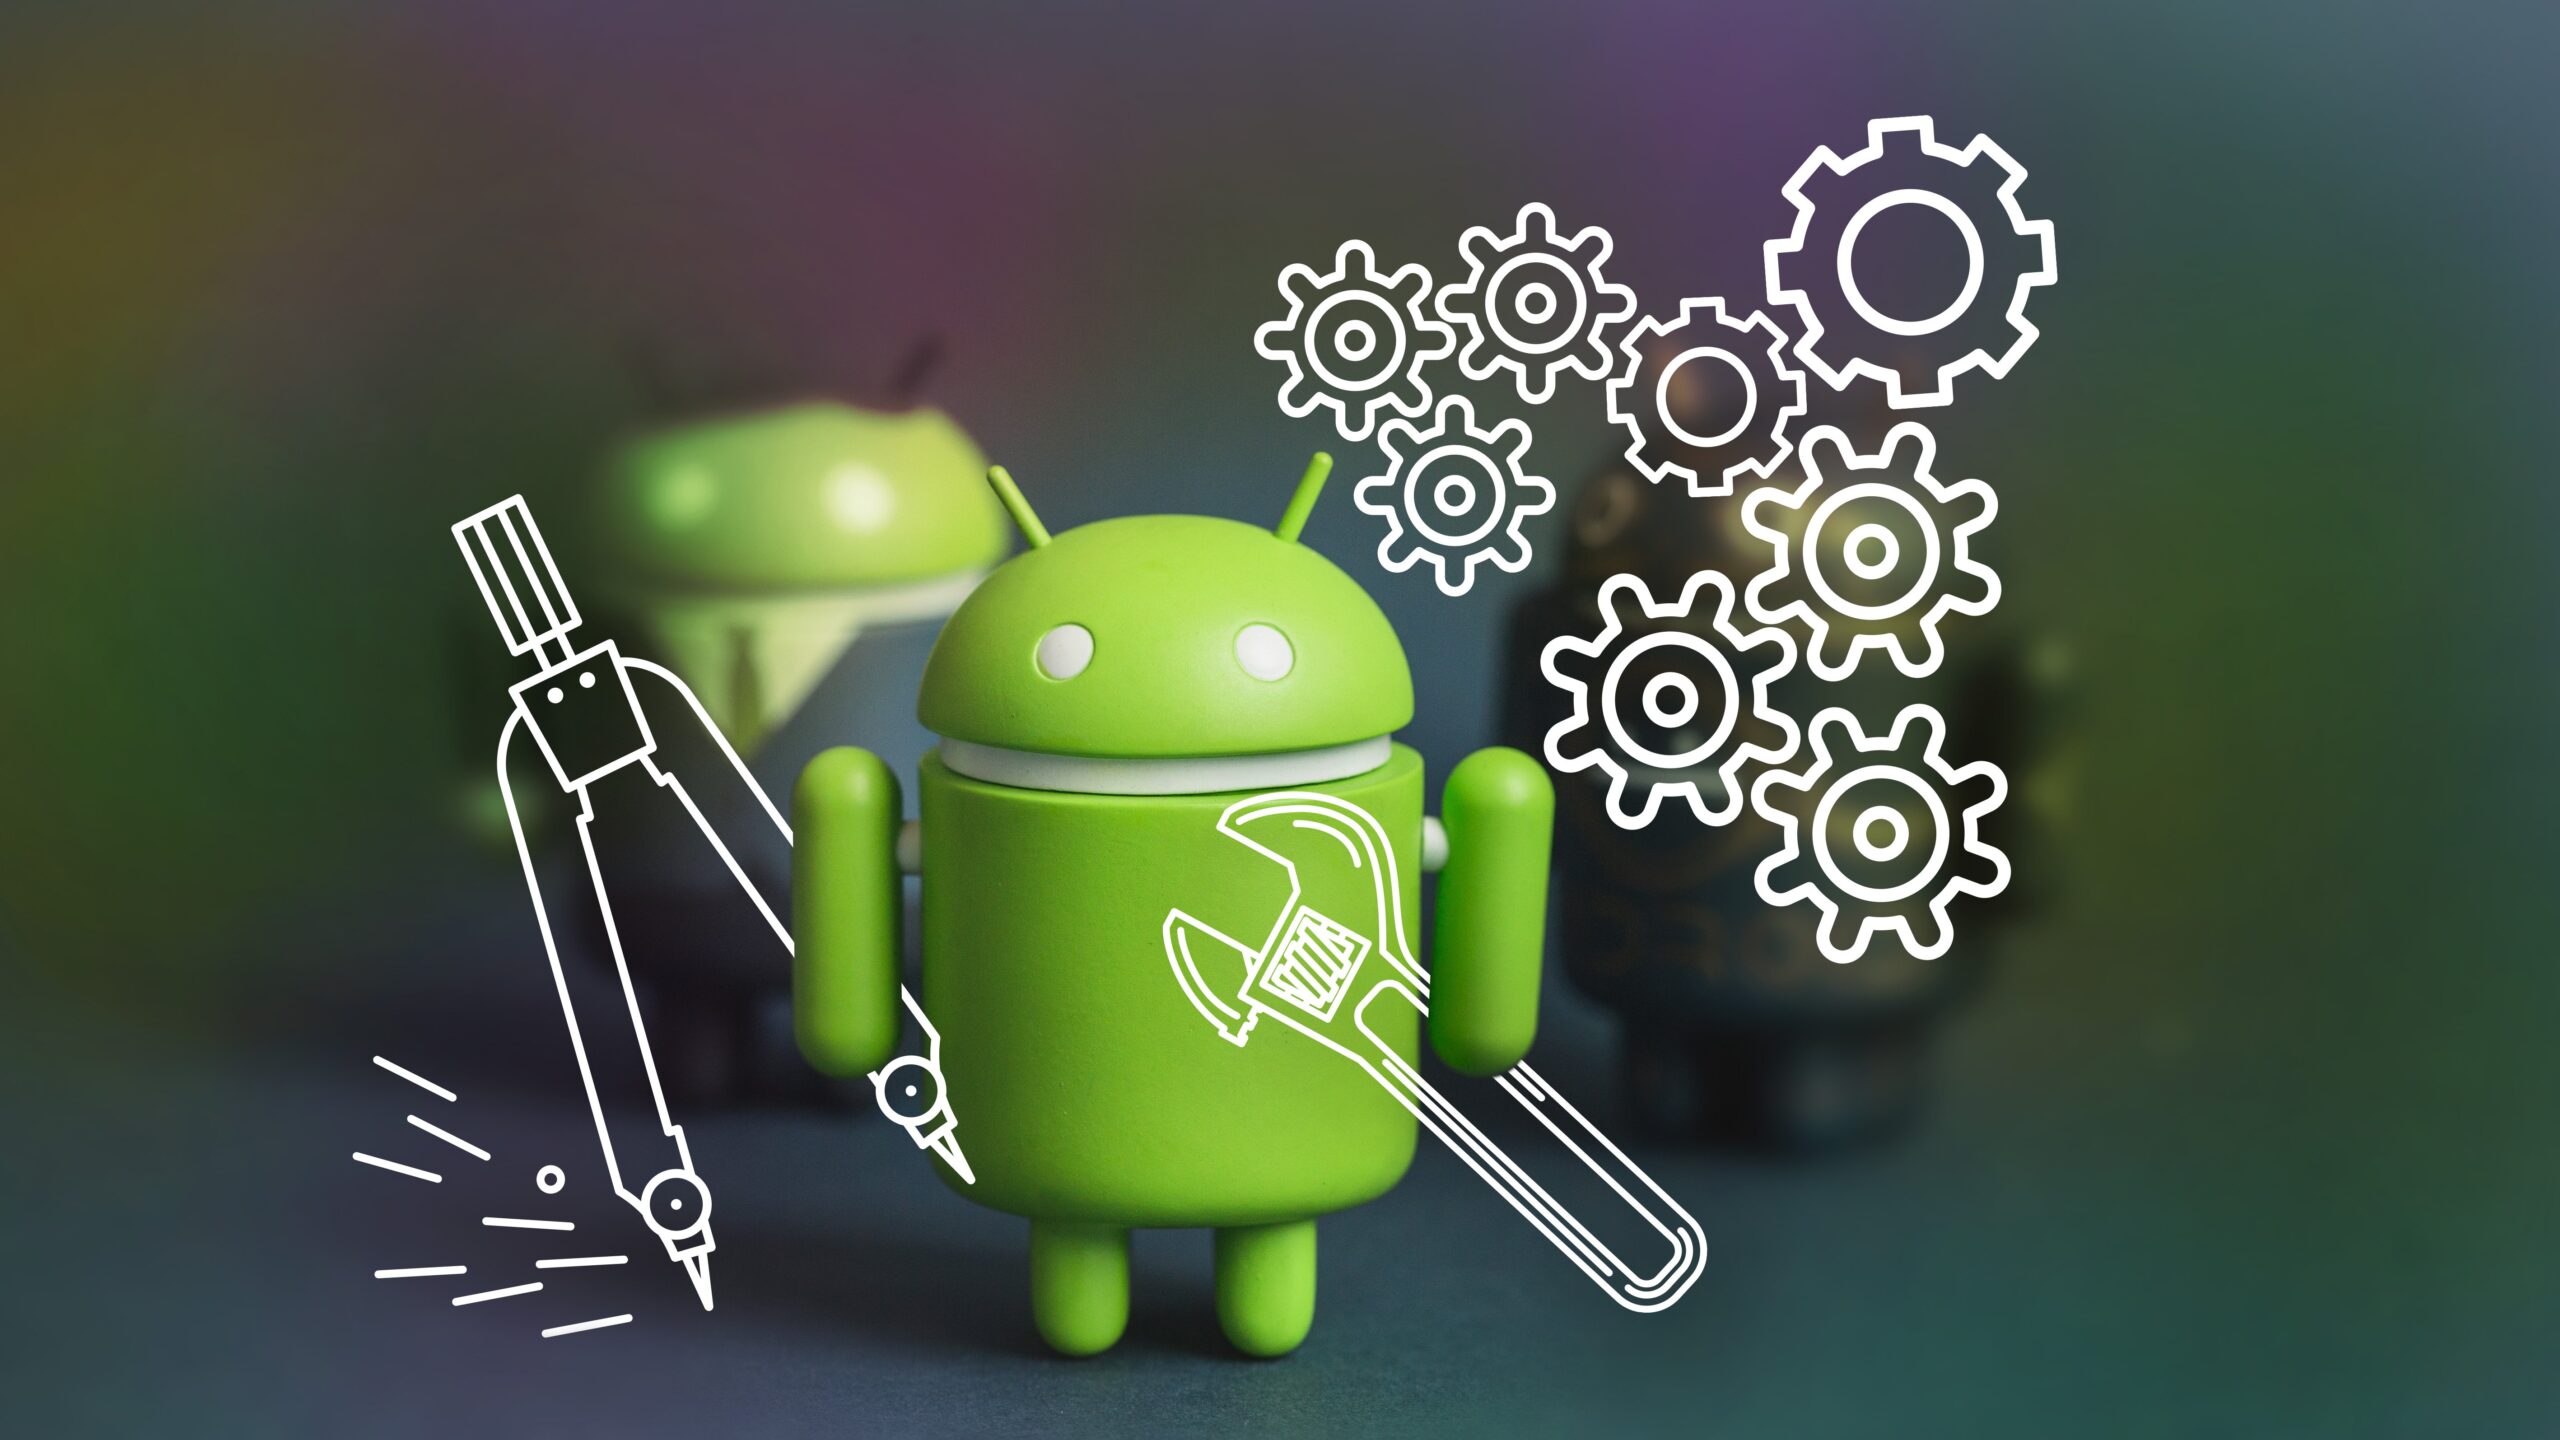 How to increase the internal memory of your Android?